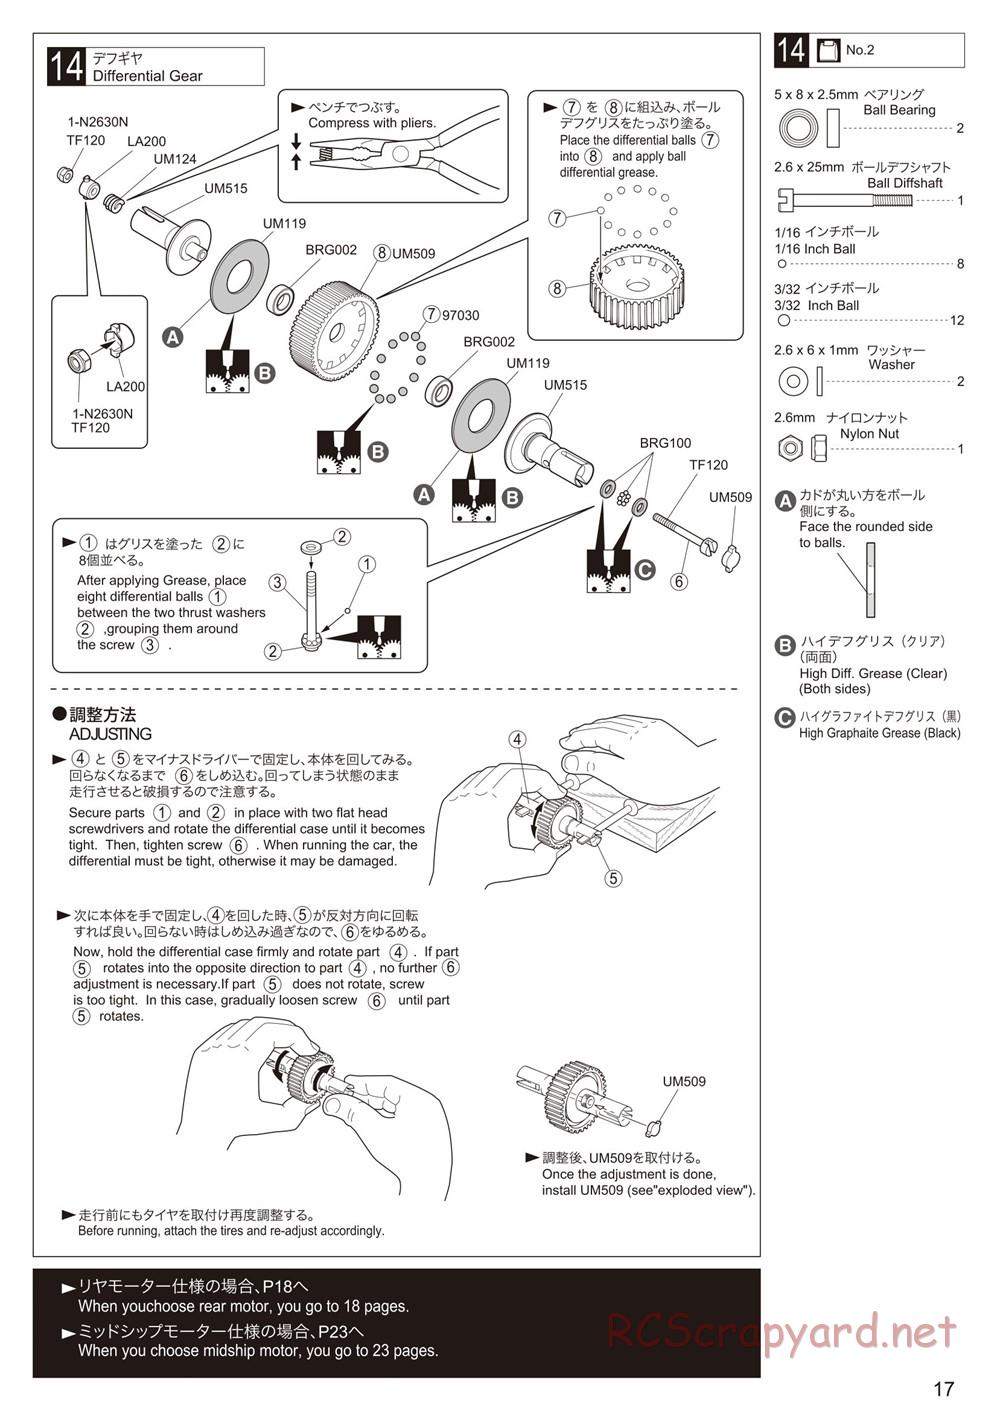 Kyosho - Ultima RB6 (2015) - Manual - Page 17